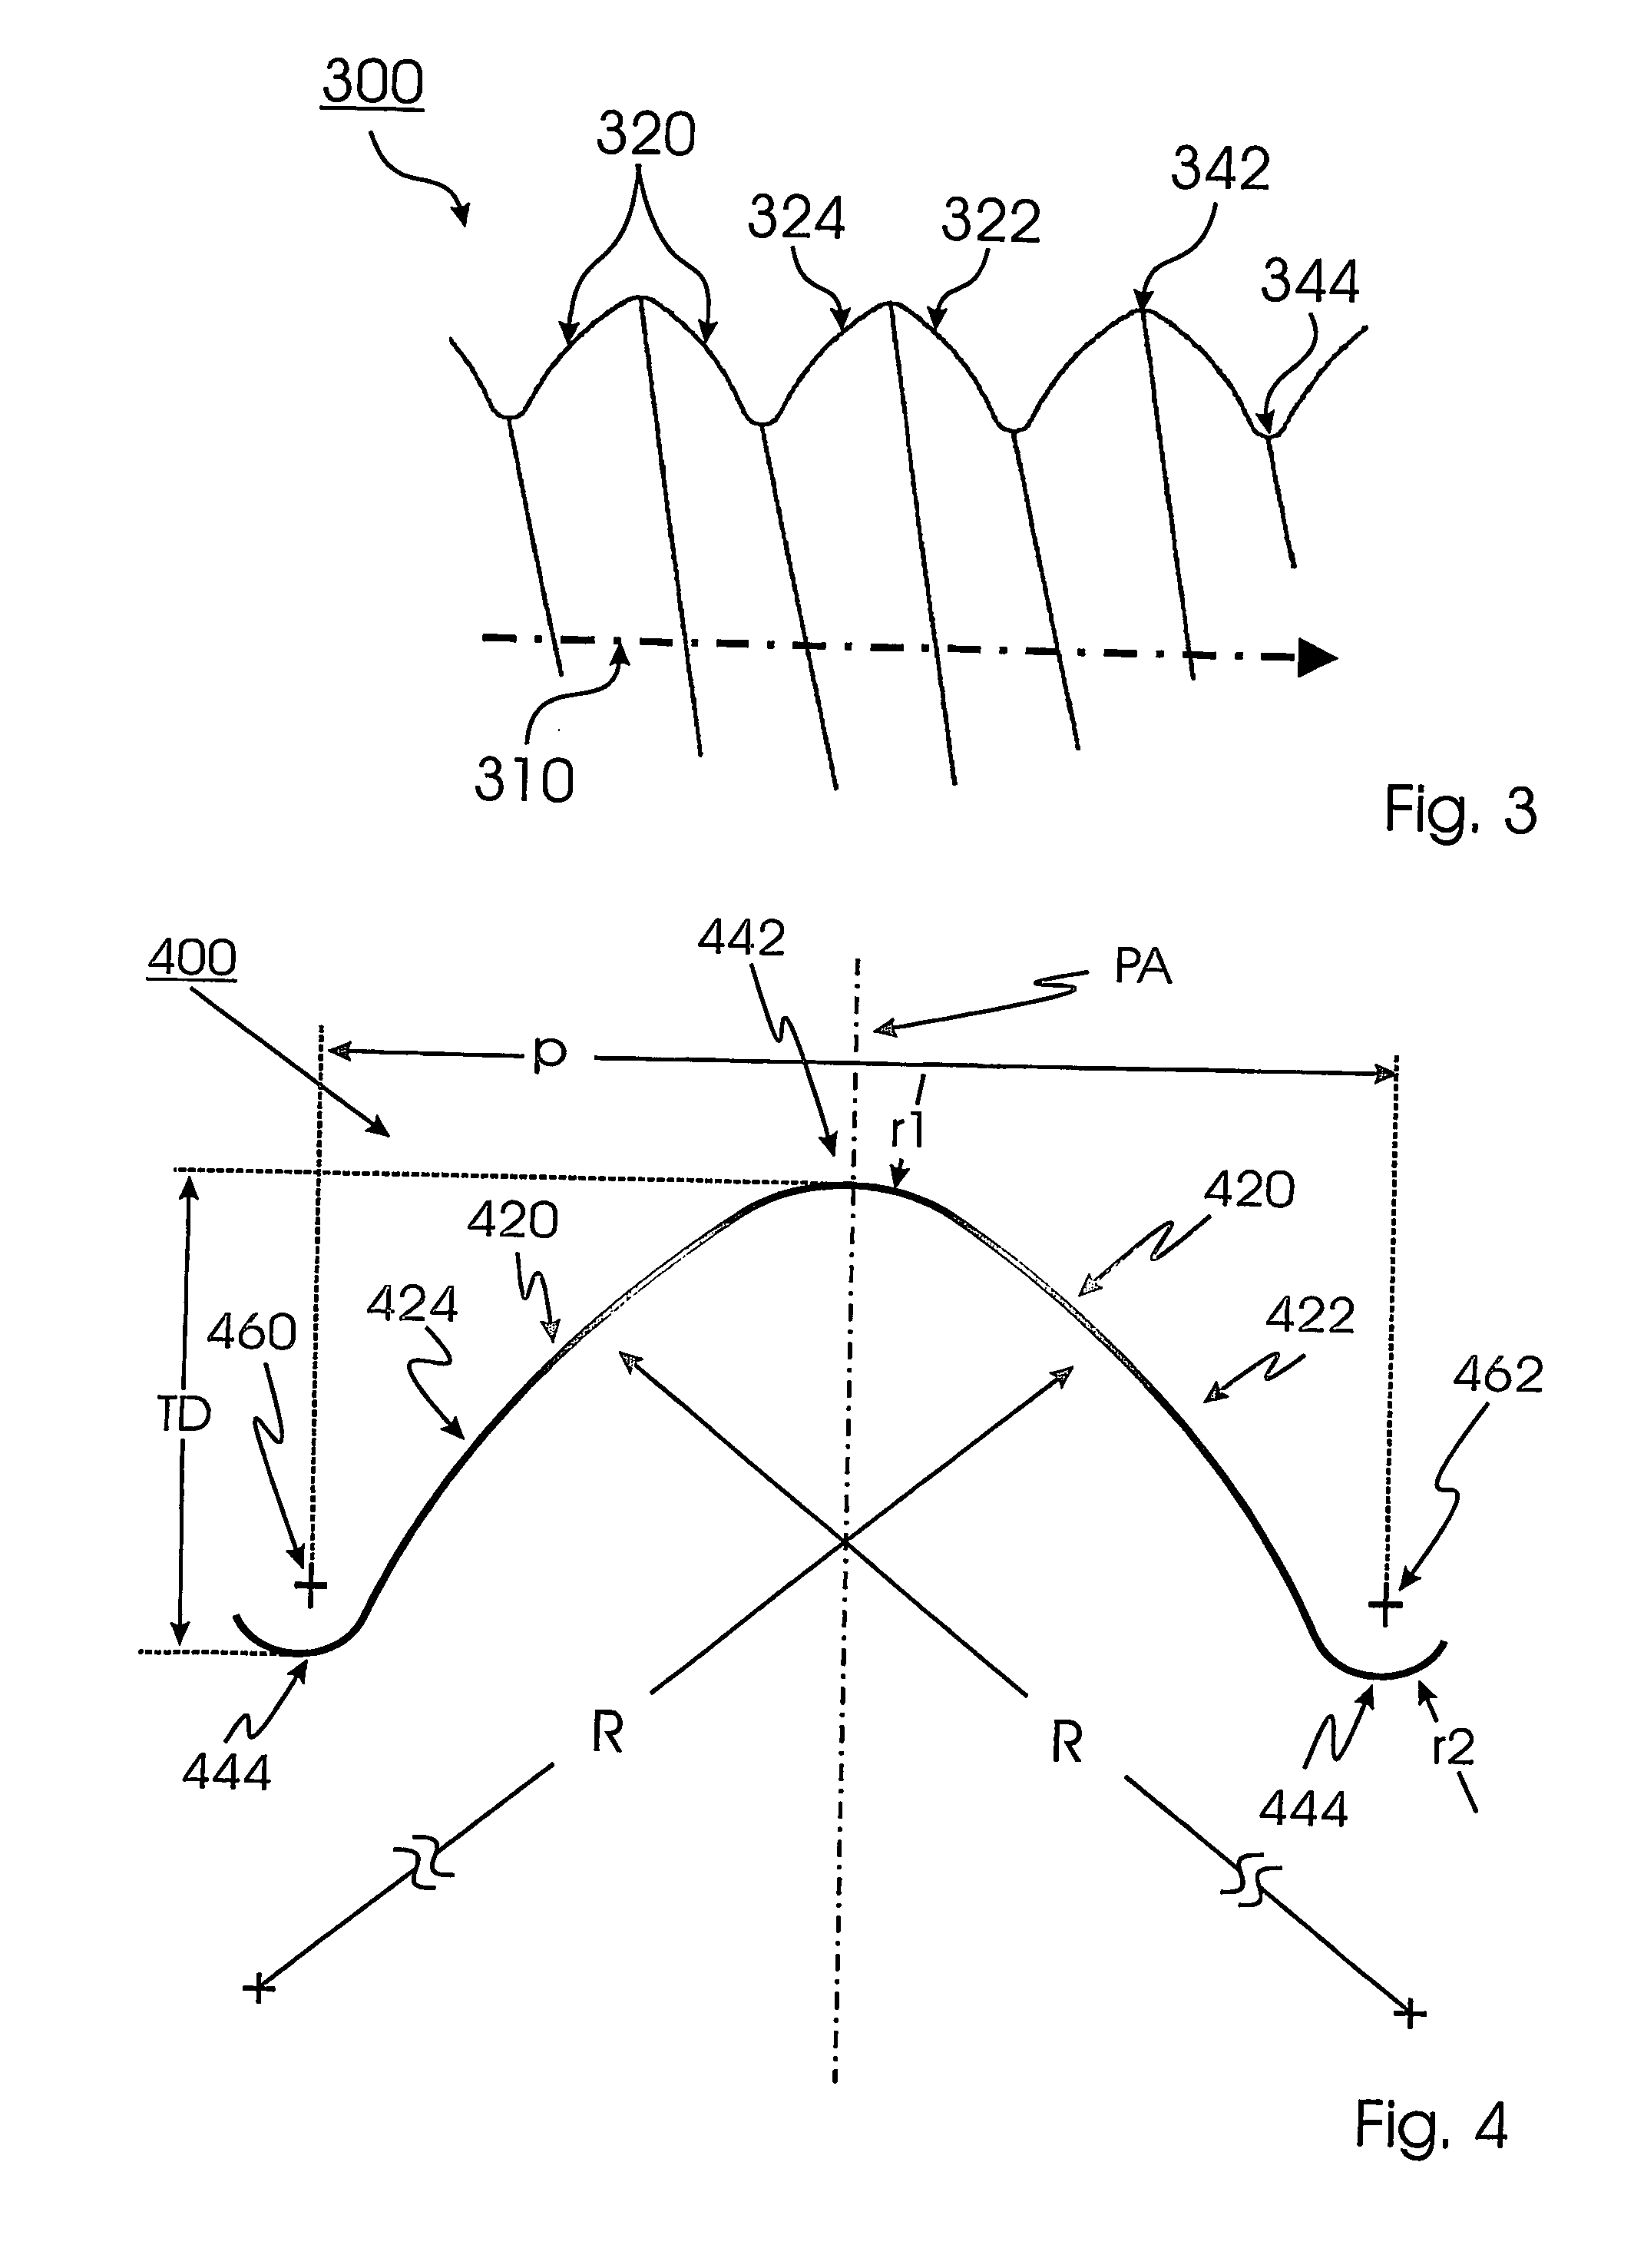 Self-tapping screw for use in low ductile materials